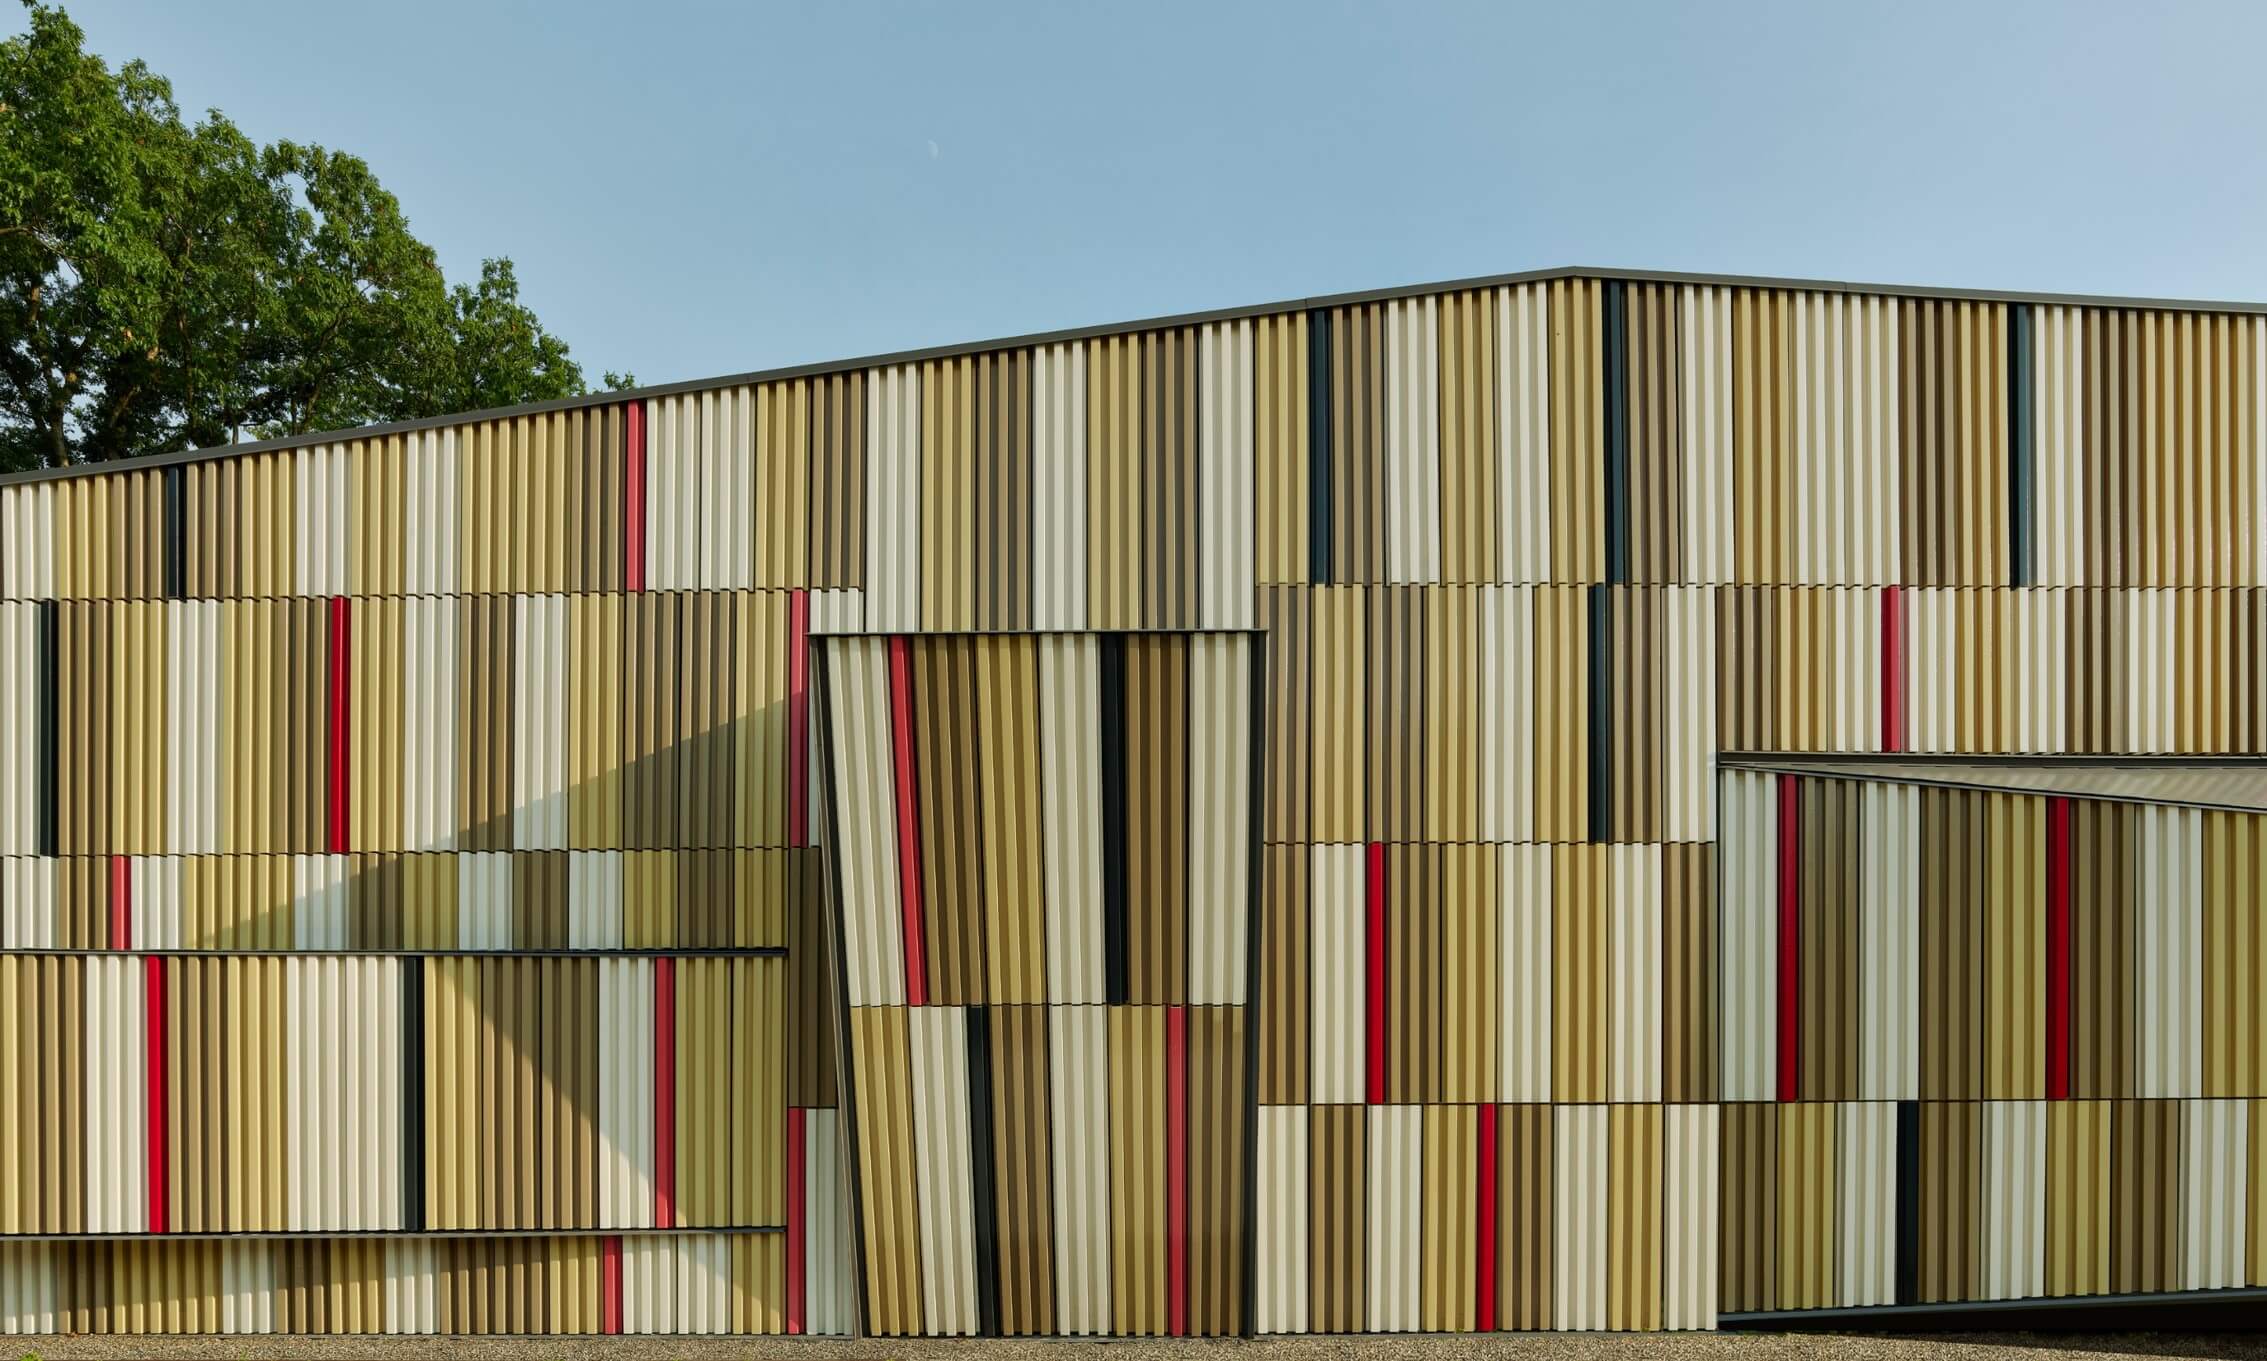 A wall of corrugated metal panels, to be shown at facades+ nyc